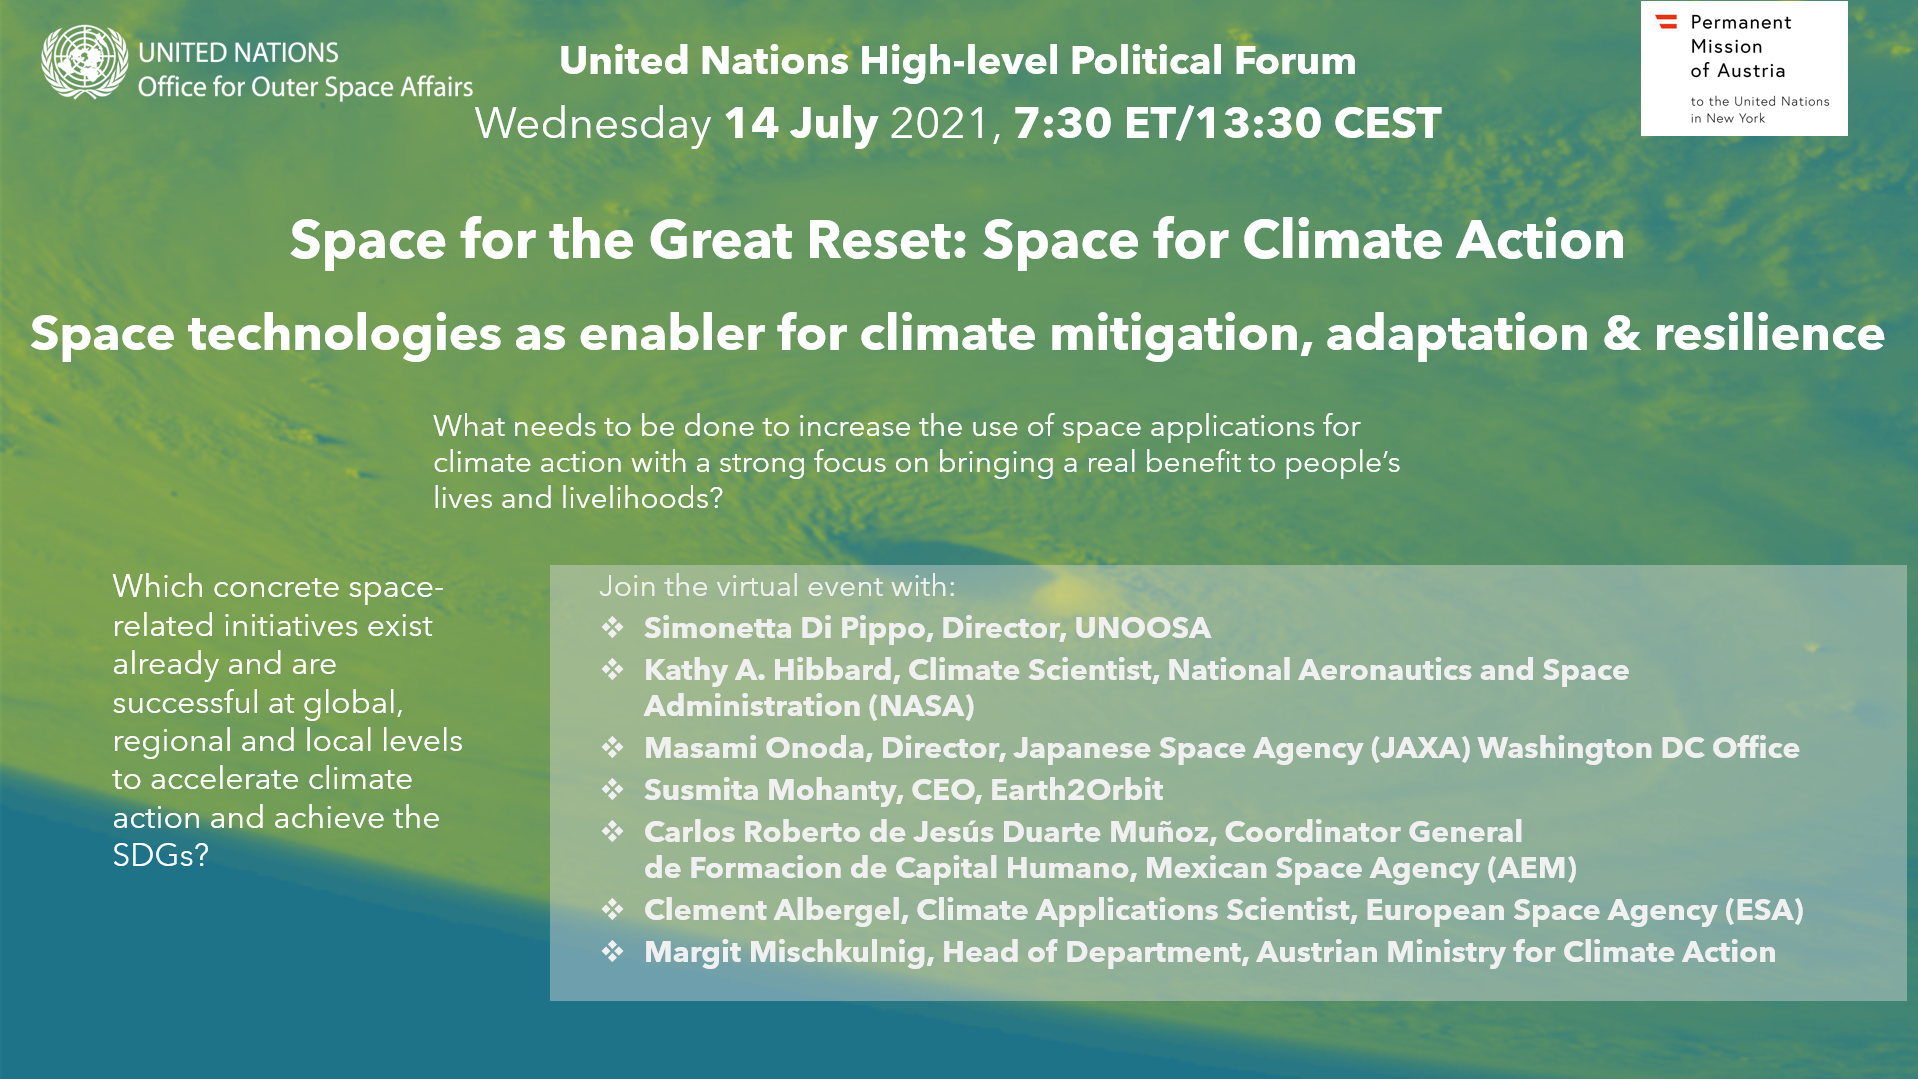 space-for-the-great-reset-space-technologies-as-enabler-for-climate-mitigation-adaptation-and